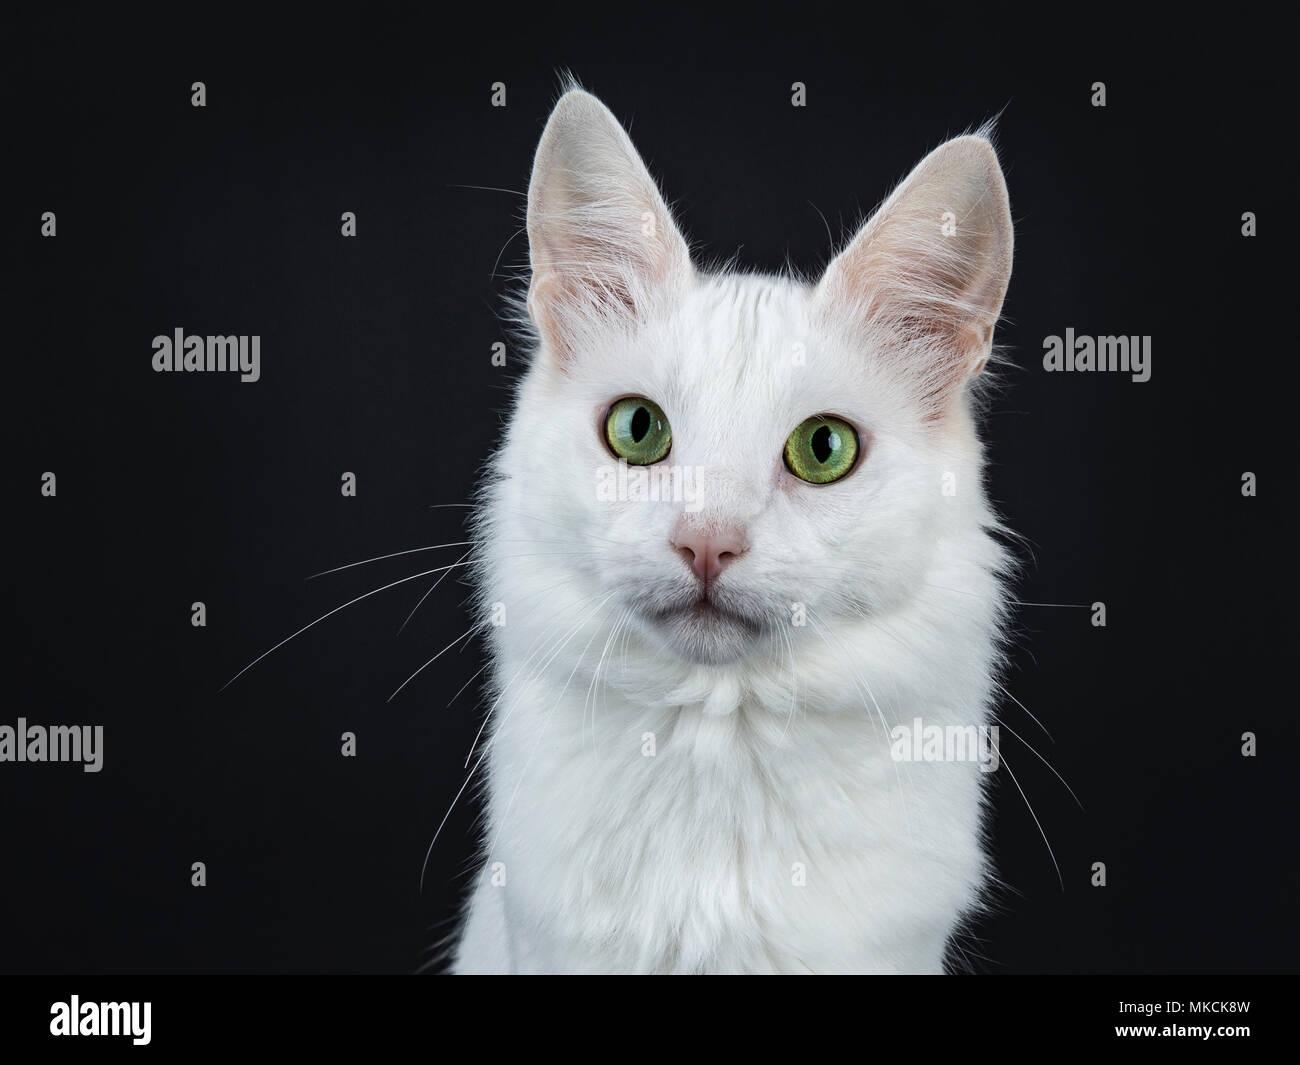 Head shot of solid white Turkish Angora cat with green eyes isolated on black background looking at camera Stock Photo